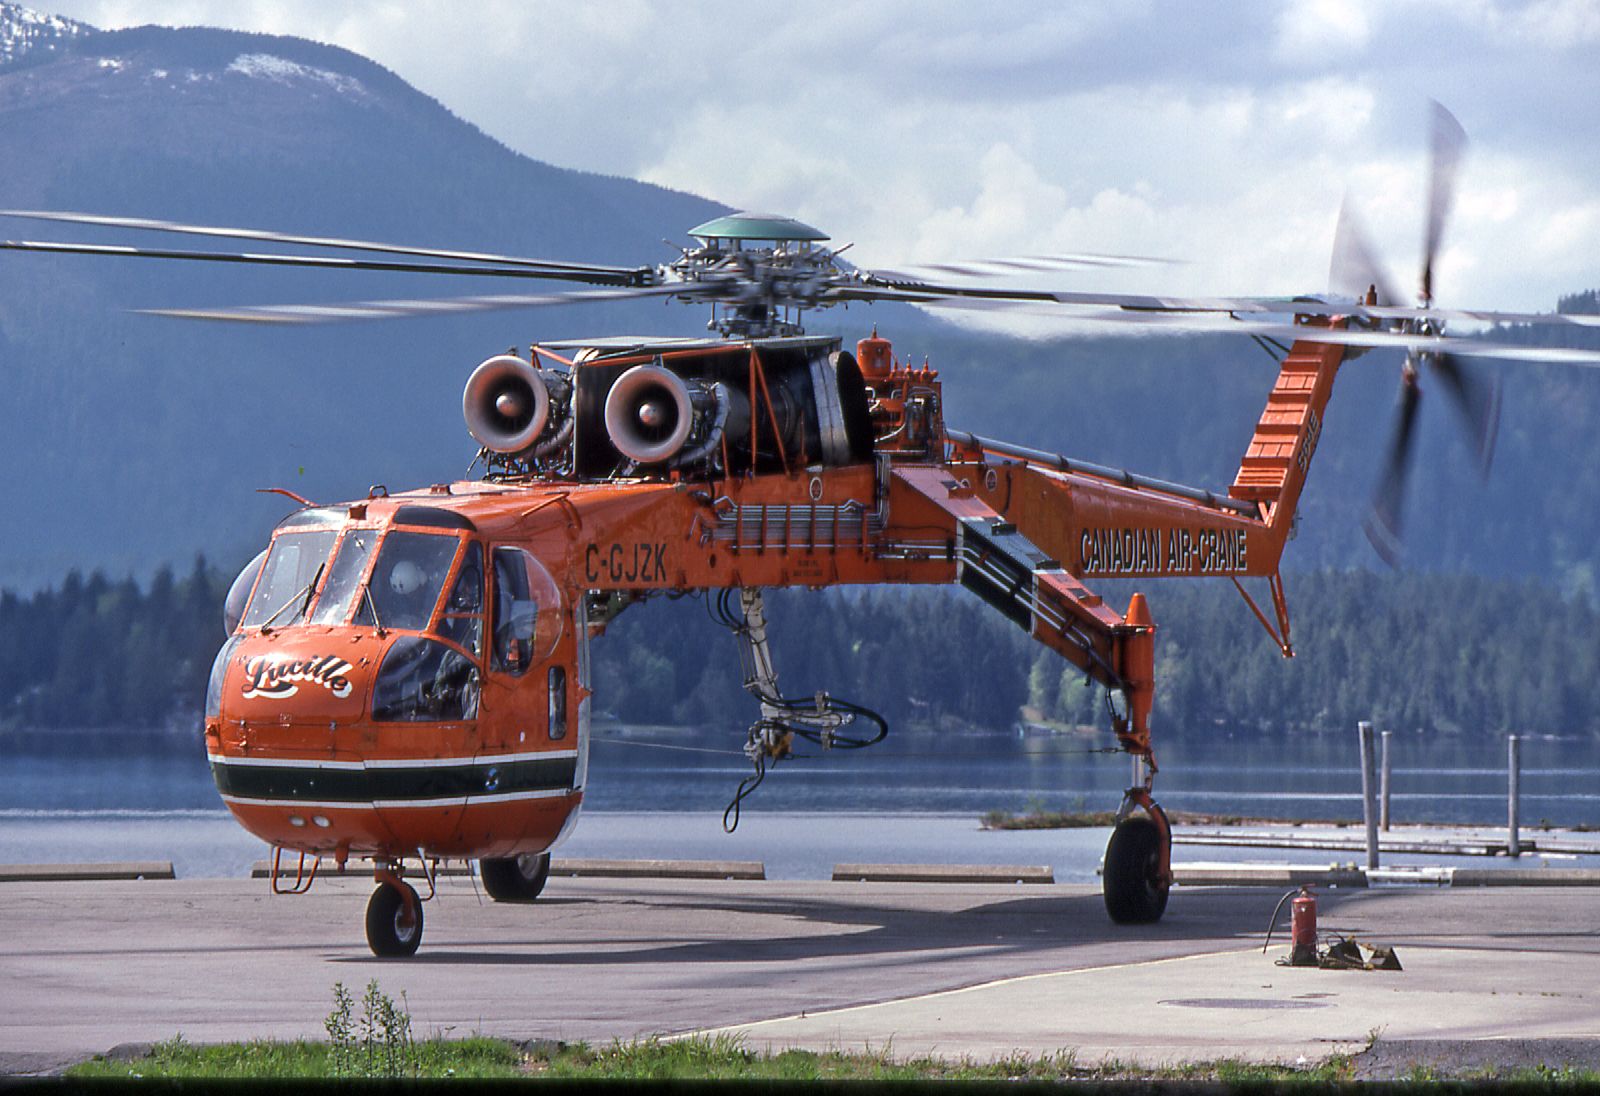 an orange helicopter on the ground with mountains in the background